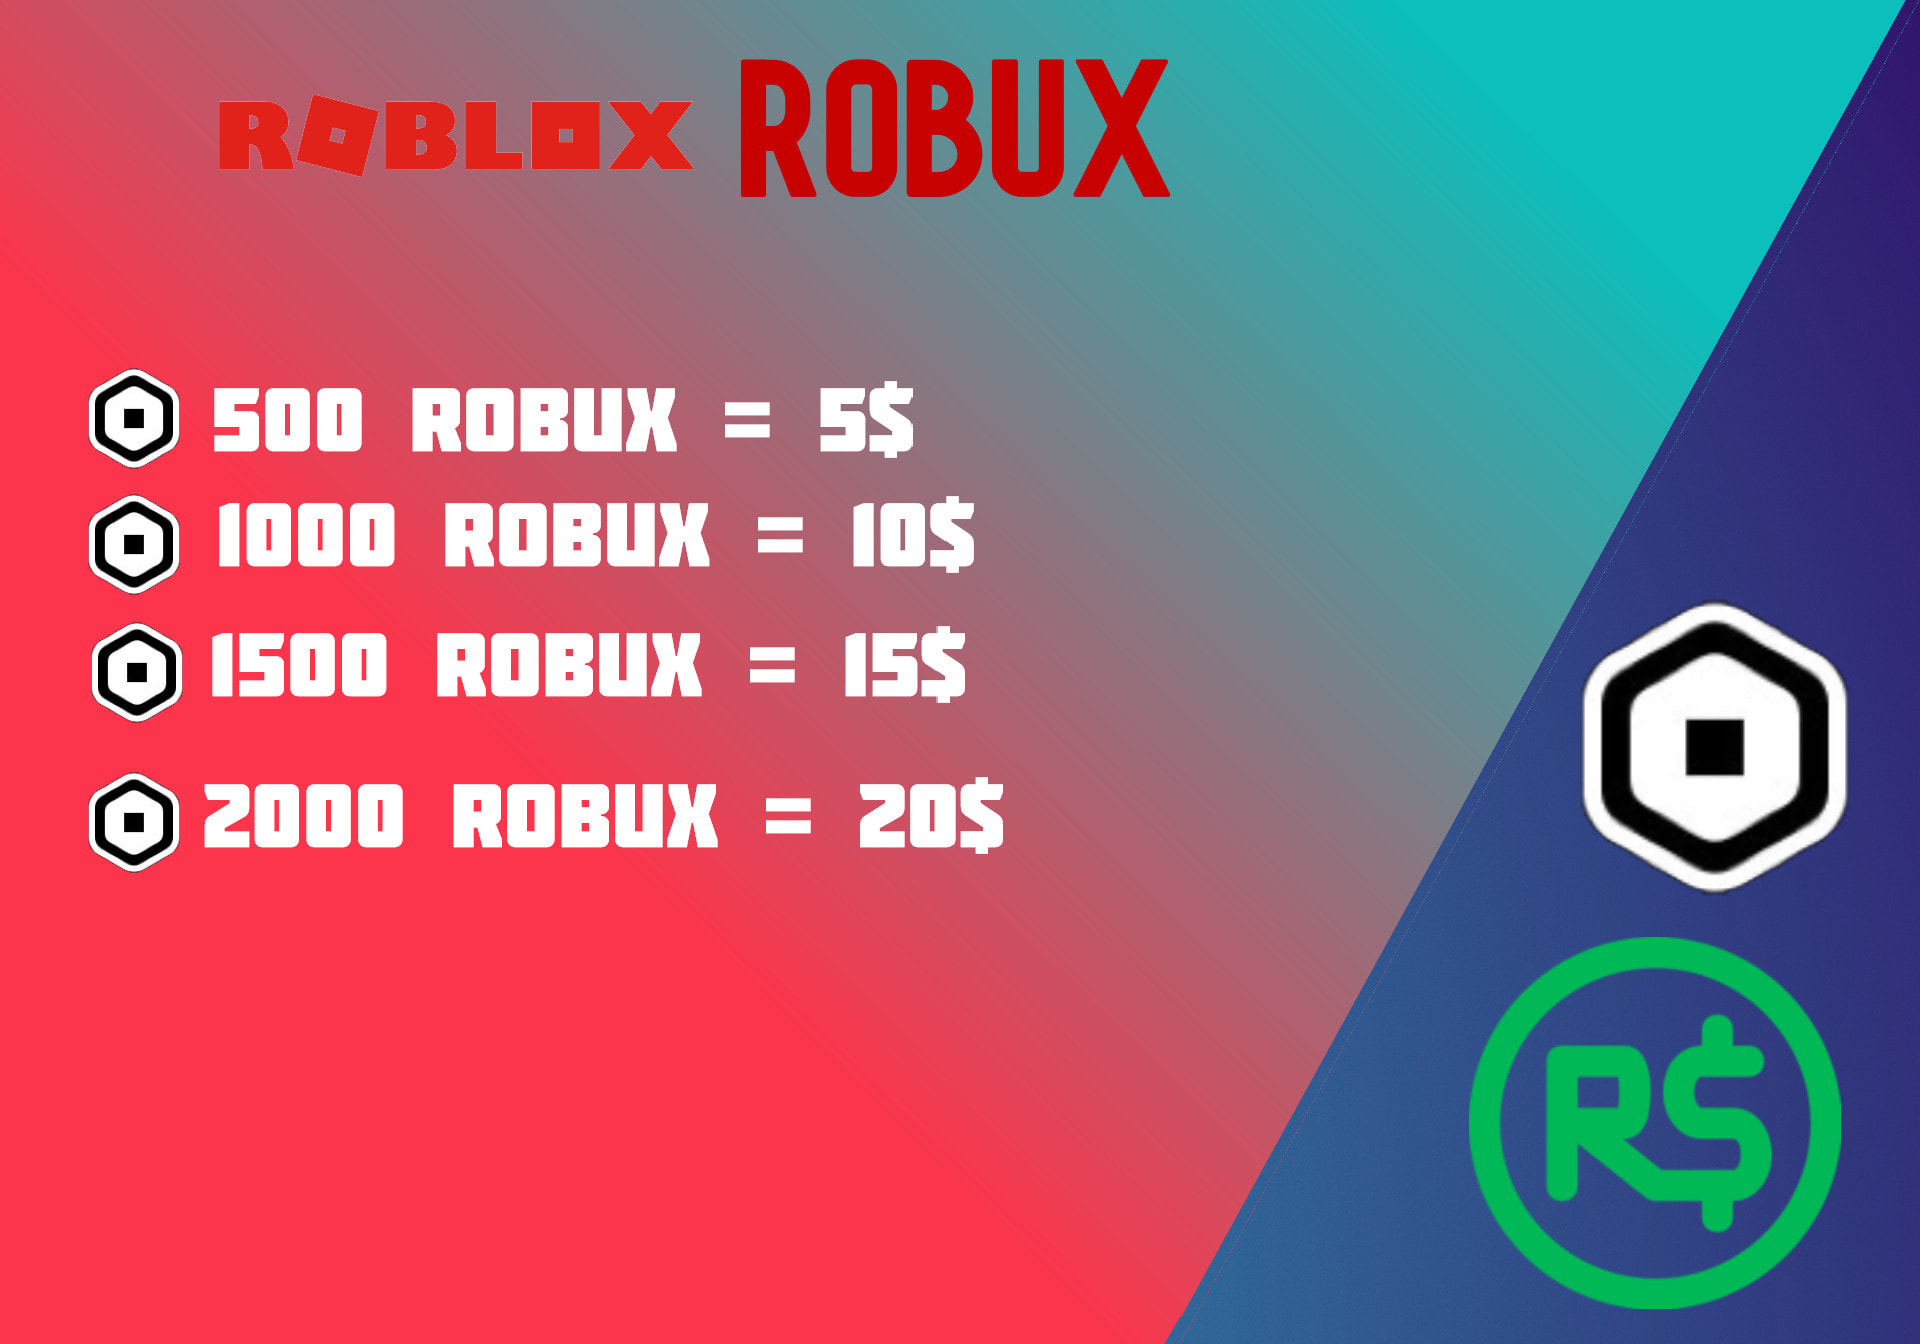 I sell a Roblox account valued at 20 thousand robux